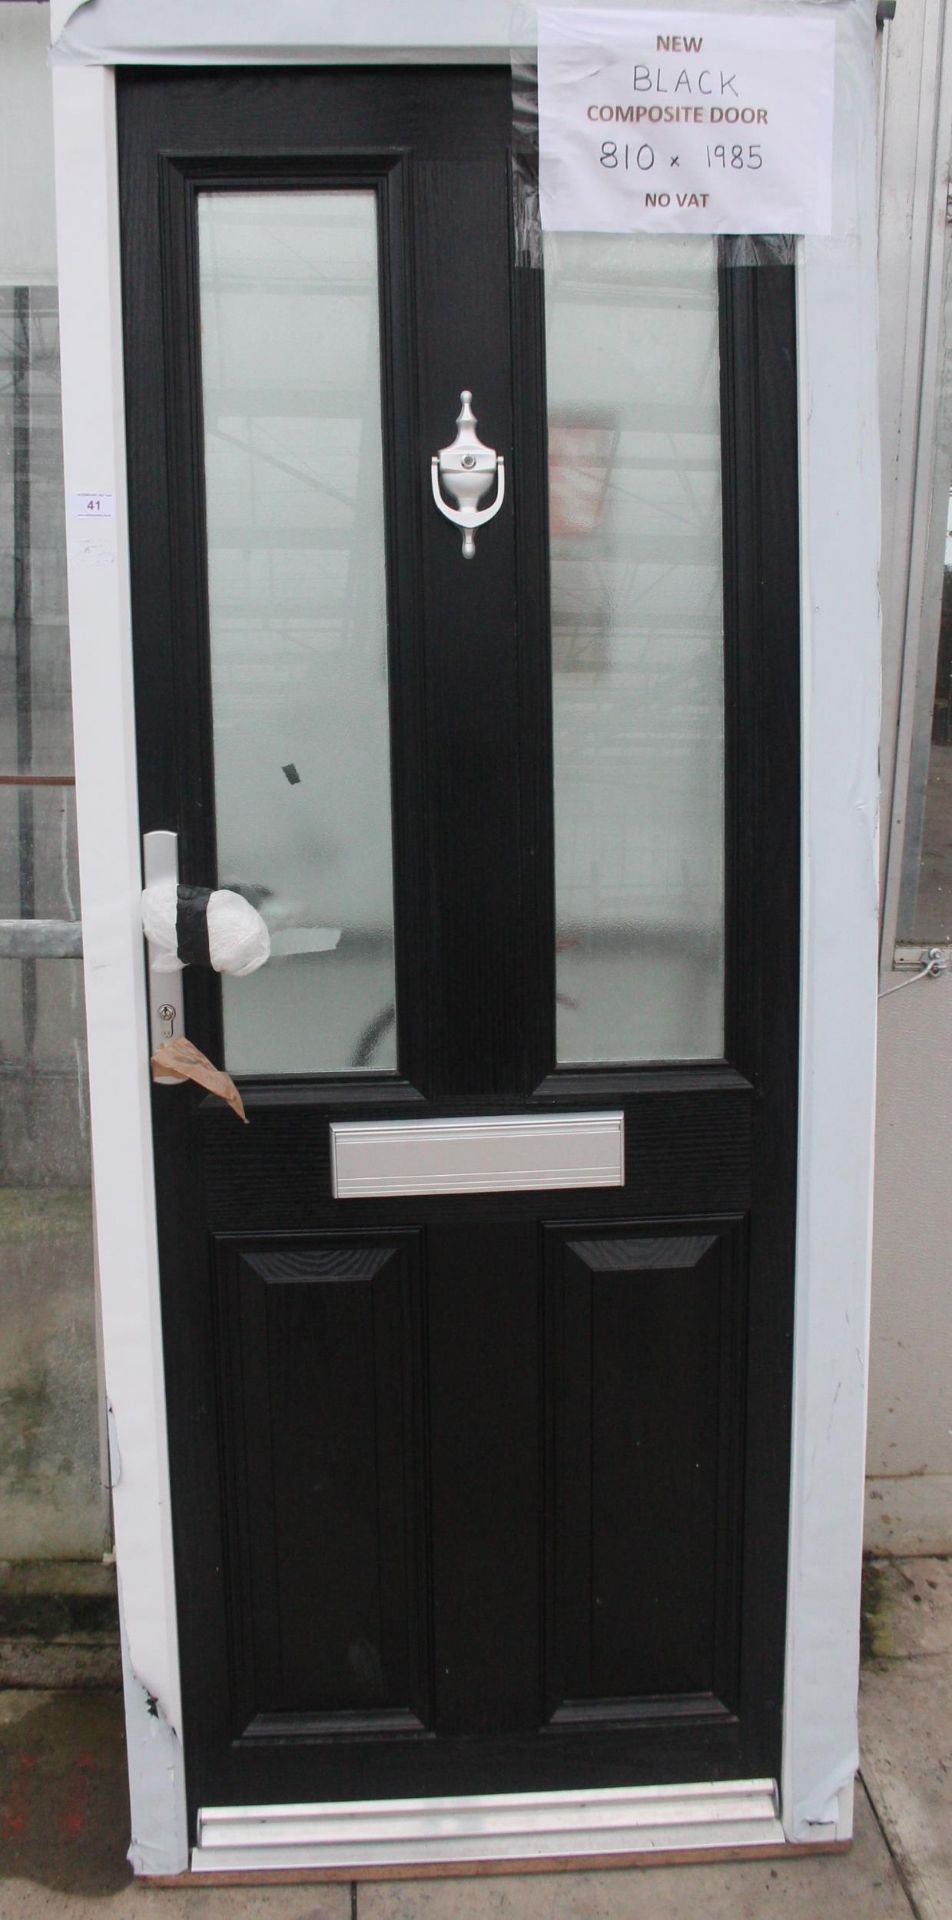 A NEW BLACK COMPOSITE DOOR AND FRAME 810MM X 1985MM LOCK AND KEYS IN LETTERBOX NO VAT